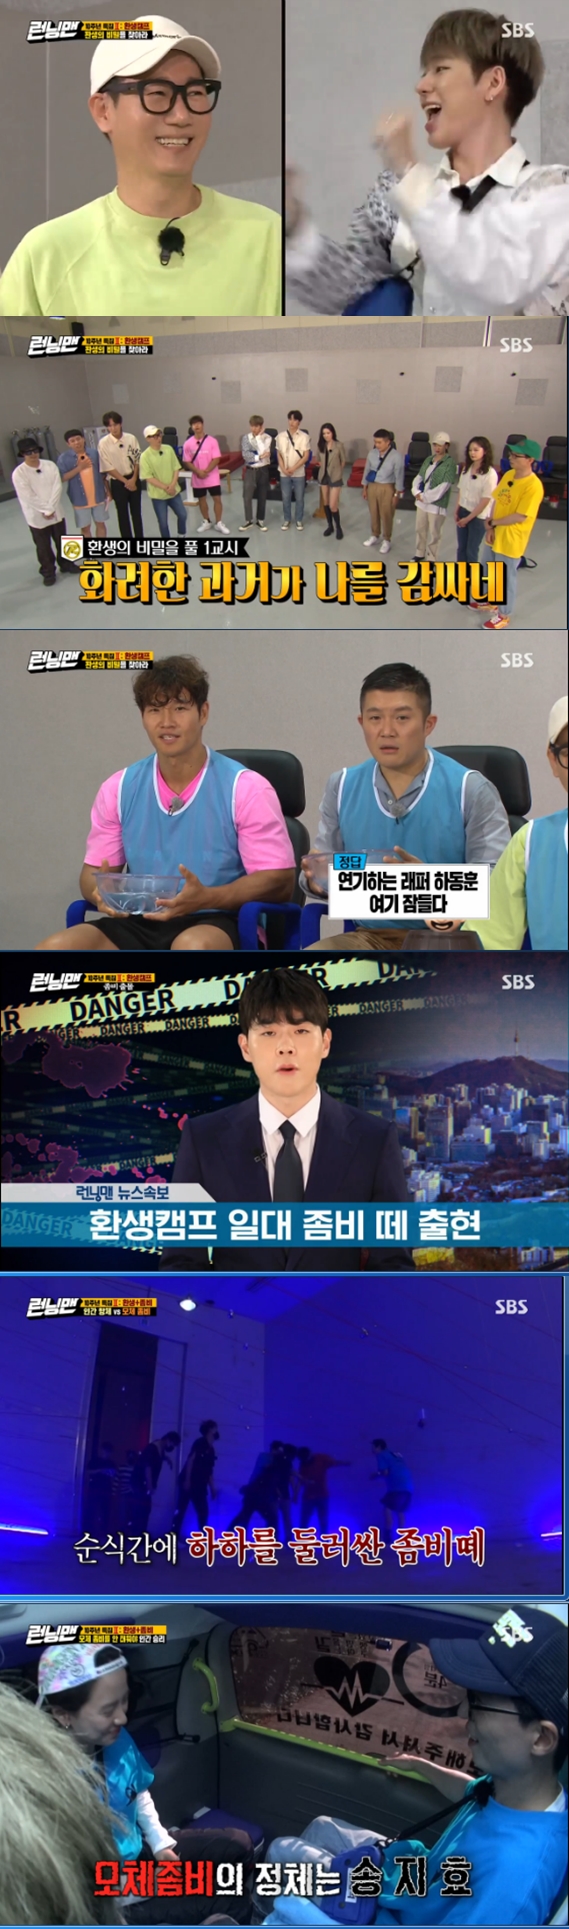 Song Ji-hyo wins perfectly with help from Jeon So-minOn the 5th, SBS entertainment program Running Man, Sunmi, Zico, Lee Do-hyun and Jo Se-ho came out as guests and showed Dead Again Special Race with the members.As long as the heat wave was on the rise, the members were gathering one or two outdoors for the opening day.Lee Kwang-soo and Yang Se-chan, Jeon So-min and Kim Jong-kook were in the opening venue before the other members.First, the four members gathered at the opening place asked each other for their regards, saying that they have been hot recently.When a consensus was formed on the heat of the conversation, Lee Kwang-soo said, It is a full storm day.Kim Jong-kook and Yang Se-chan Jeon So-min, who did not miss this, said, Why do you say that here?Lee Kwang-soo was embarrassed and could not answer, but found Song Ji-hyo and changed the topic quickly and laughed.To the members gathered at the opening, the production team said that it will hold Dead Again Special Race as a feature that viewers want to see again on the 10th anniversary.The production team then said, There is a guest to guide you, and Sunmi got off the bus.The members who saw Sunmi welcomed her and got in the car, and besides Sunmi, Zico, Lee Do-hyun and Jo Se-ho were in the car.On the bus, this ng H Sai Yoo Jae-Suk briefly interviewed the guests.However, Yoo Jae-Suk omitted his usual interview with close Jo Se-ho.Yang Se-chan started teasing, saying, You got Seho today, and Jeon So-min said, I didnt even know he was here.She then laughed, saying, I lost weight and my presence disappeared.Jo Se-ho said, I wanted to show a little change, and showed a love line with Jeon So-min.All the members sent a message, but Jeon So-min did not show a disliked expression, raising expectations for the love line between the two.The first mission to unravel Dead Again was The brilliant past envelops me; it was a mission that gave good lunch to teams who had past quizzes about the members.As a result of the mission, Kim Jong-kook team won first place and Yoo Jae-Suk team ranked first.Suddenly Zombie 2: The Dead are Among Us came to Yoo Jae-Suk, Haha, and Lee Do-hyun who were steaming in rice.Song Ji-hyos team, which is trying to boil ramen after the Yoo Jae-Suk team, also encountered Zombie 2: The Dead are Among Us.The news arrived for the embarrassed members about the Zombie 2: The Dead are Among Us times, and the text contained a message saying, Zombie 2: The Dead are Among Us are sensitive to hearing and smell, so be careful not to rip off the name tag.The Yoo Jae-Suk team and the Song Ji-hyo team, who were eating outside, headed for the Safe Zone, away from the Zombie 2: The Dead are Among Us, as the news told us.The place where the first and second teams were eating was Safe Zone, and after time, the Yoo Jae-Suk team arrived in turn.Inside the Safe Zone was a manual that the appearance and behavior were the same as the human being, and the members had to catch the upper Zombie 2: The Dead are Among Us.Members seriously murder, She Wrote, knowing that senior Zombie 2: The Dead are Among Us was hiding among the cast.But then Ji Suk-jin played the holo, and the members threw him out of the clunky Zombie 2: The Dead are Among Us.A short time later, Ji Suk-jin, who tore his name tag to the Zombie 2: The Dead are Among Us, immediately became a junior Zombie 2: The Dead are Among Us and laughed.Continued Murder, She Wrote end Haha, Yoo Jae-Suk, Lee Kwang-soo and Jo Se-ho were off the Zombie 2: The Dead are Among Us Dragonship.But when Kim Jong-kook gave the item to the mother, Zombie 2: The Dead are Among Us, they put it in a box with Lee Kwang-soo, and after a while Lee Kwang-soo was infected with the senior Zombie 2: The Dead are Among Us.With the last 10 minutes left, Zombie 2: The Dead are Among Us became violent, and they were infected to the lower Zombie 2: The Dead are Among Us, to Jo Se-ho, Lee Do-hyun, Haha, and Lee Kwang-soo.Meanwhile, Yoo Jae-Suk found out about how to infect Infection just before the end of the race.Zico then suspected that Jeon So-min, who claims to be a human antibody, was a mother-of-one Zombie 2: The Dead are Among Us.By the end, Yoo Jae-Suk, who was convinced to be human, took Zico and Song Ji-hyo to the ambulance.But Motherhood 2: The Dead are Among Us was Song Ji-hyo, and the final win was Zombie 2: The Dead are Among Us.